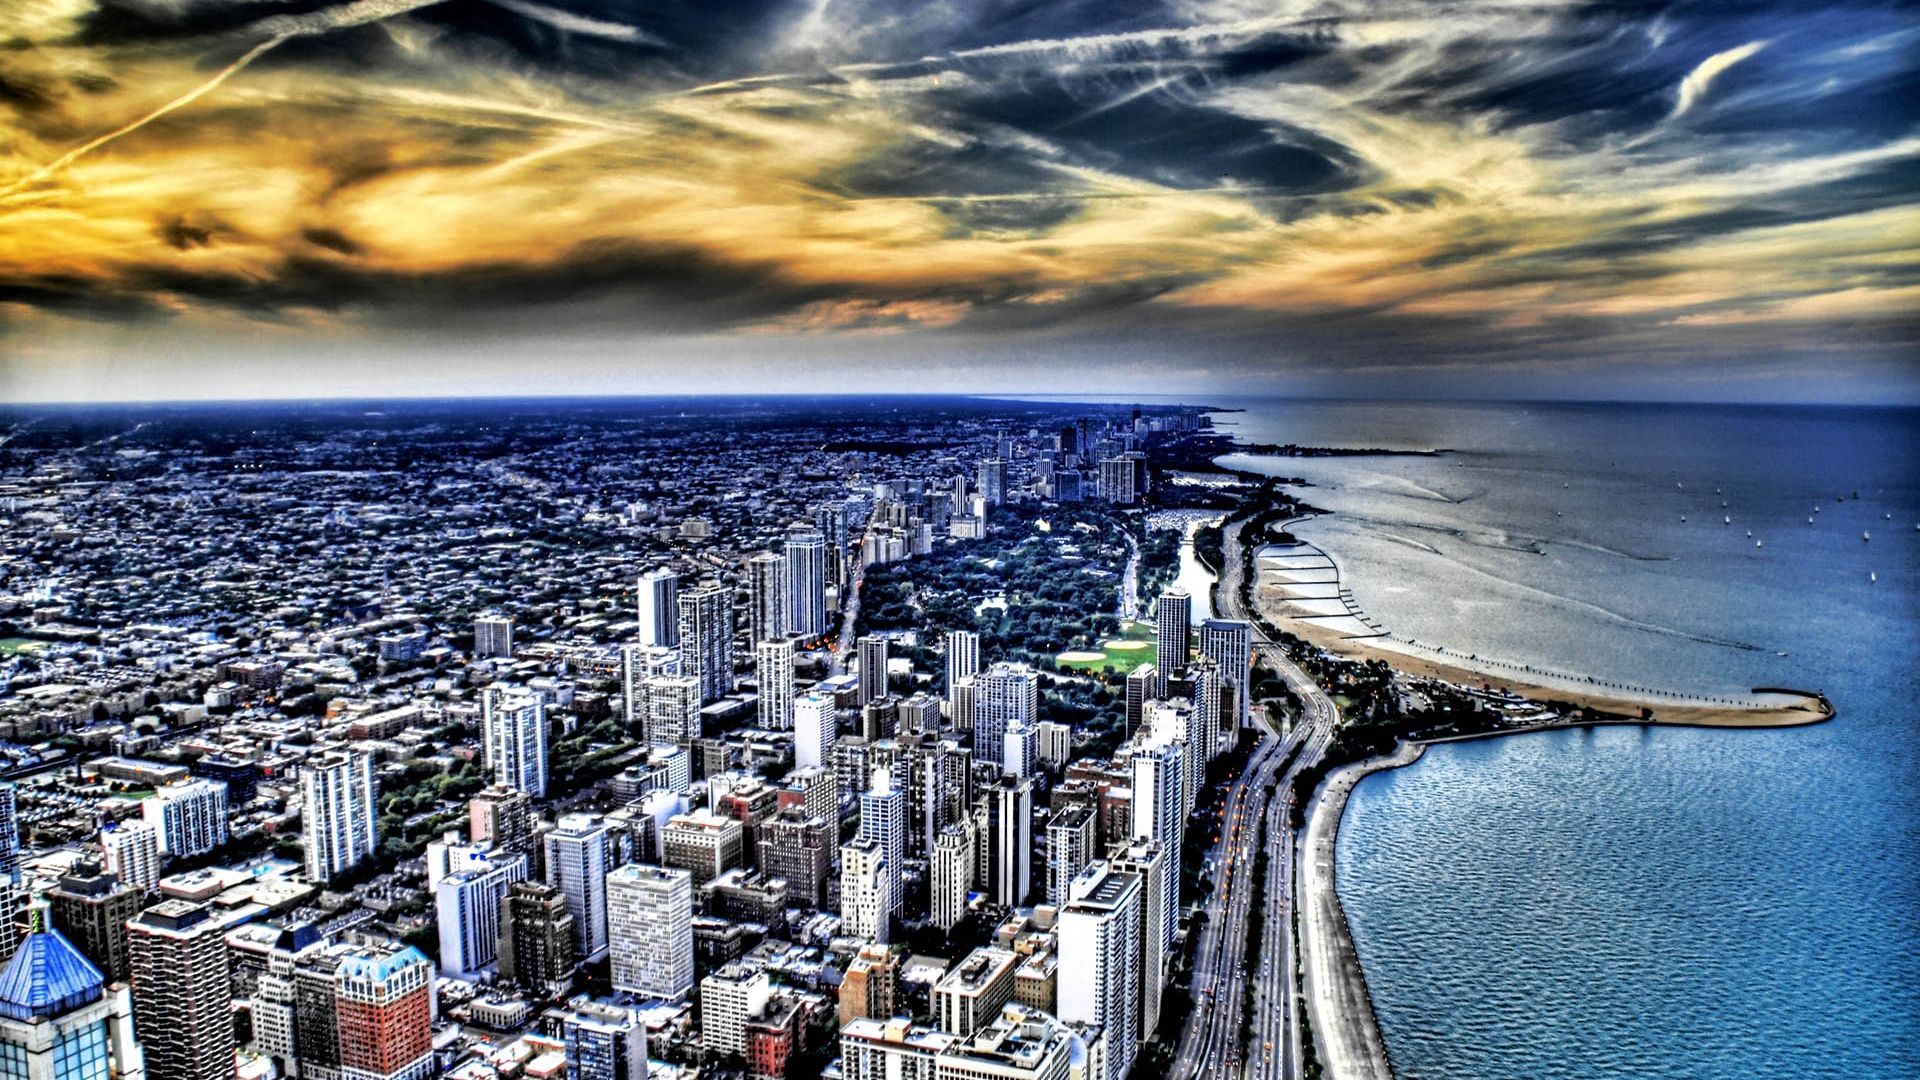 cities, shore, ocean, bank, chicago, building, view from above, skyscrapers, hdr